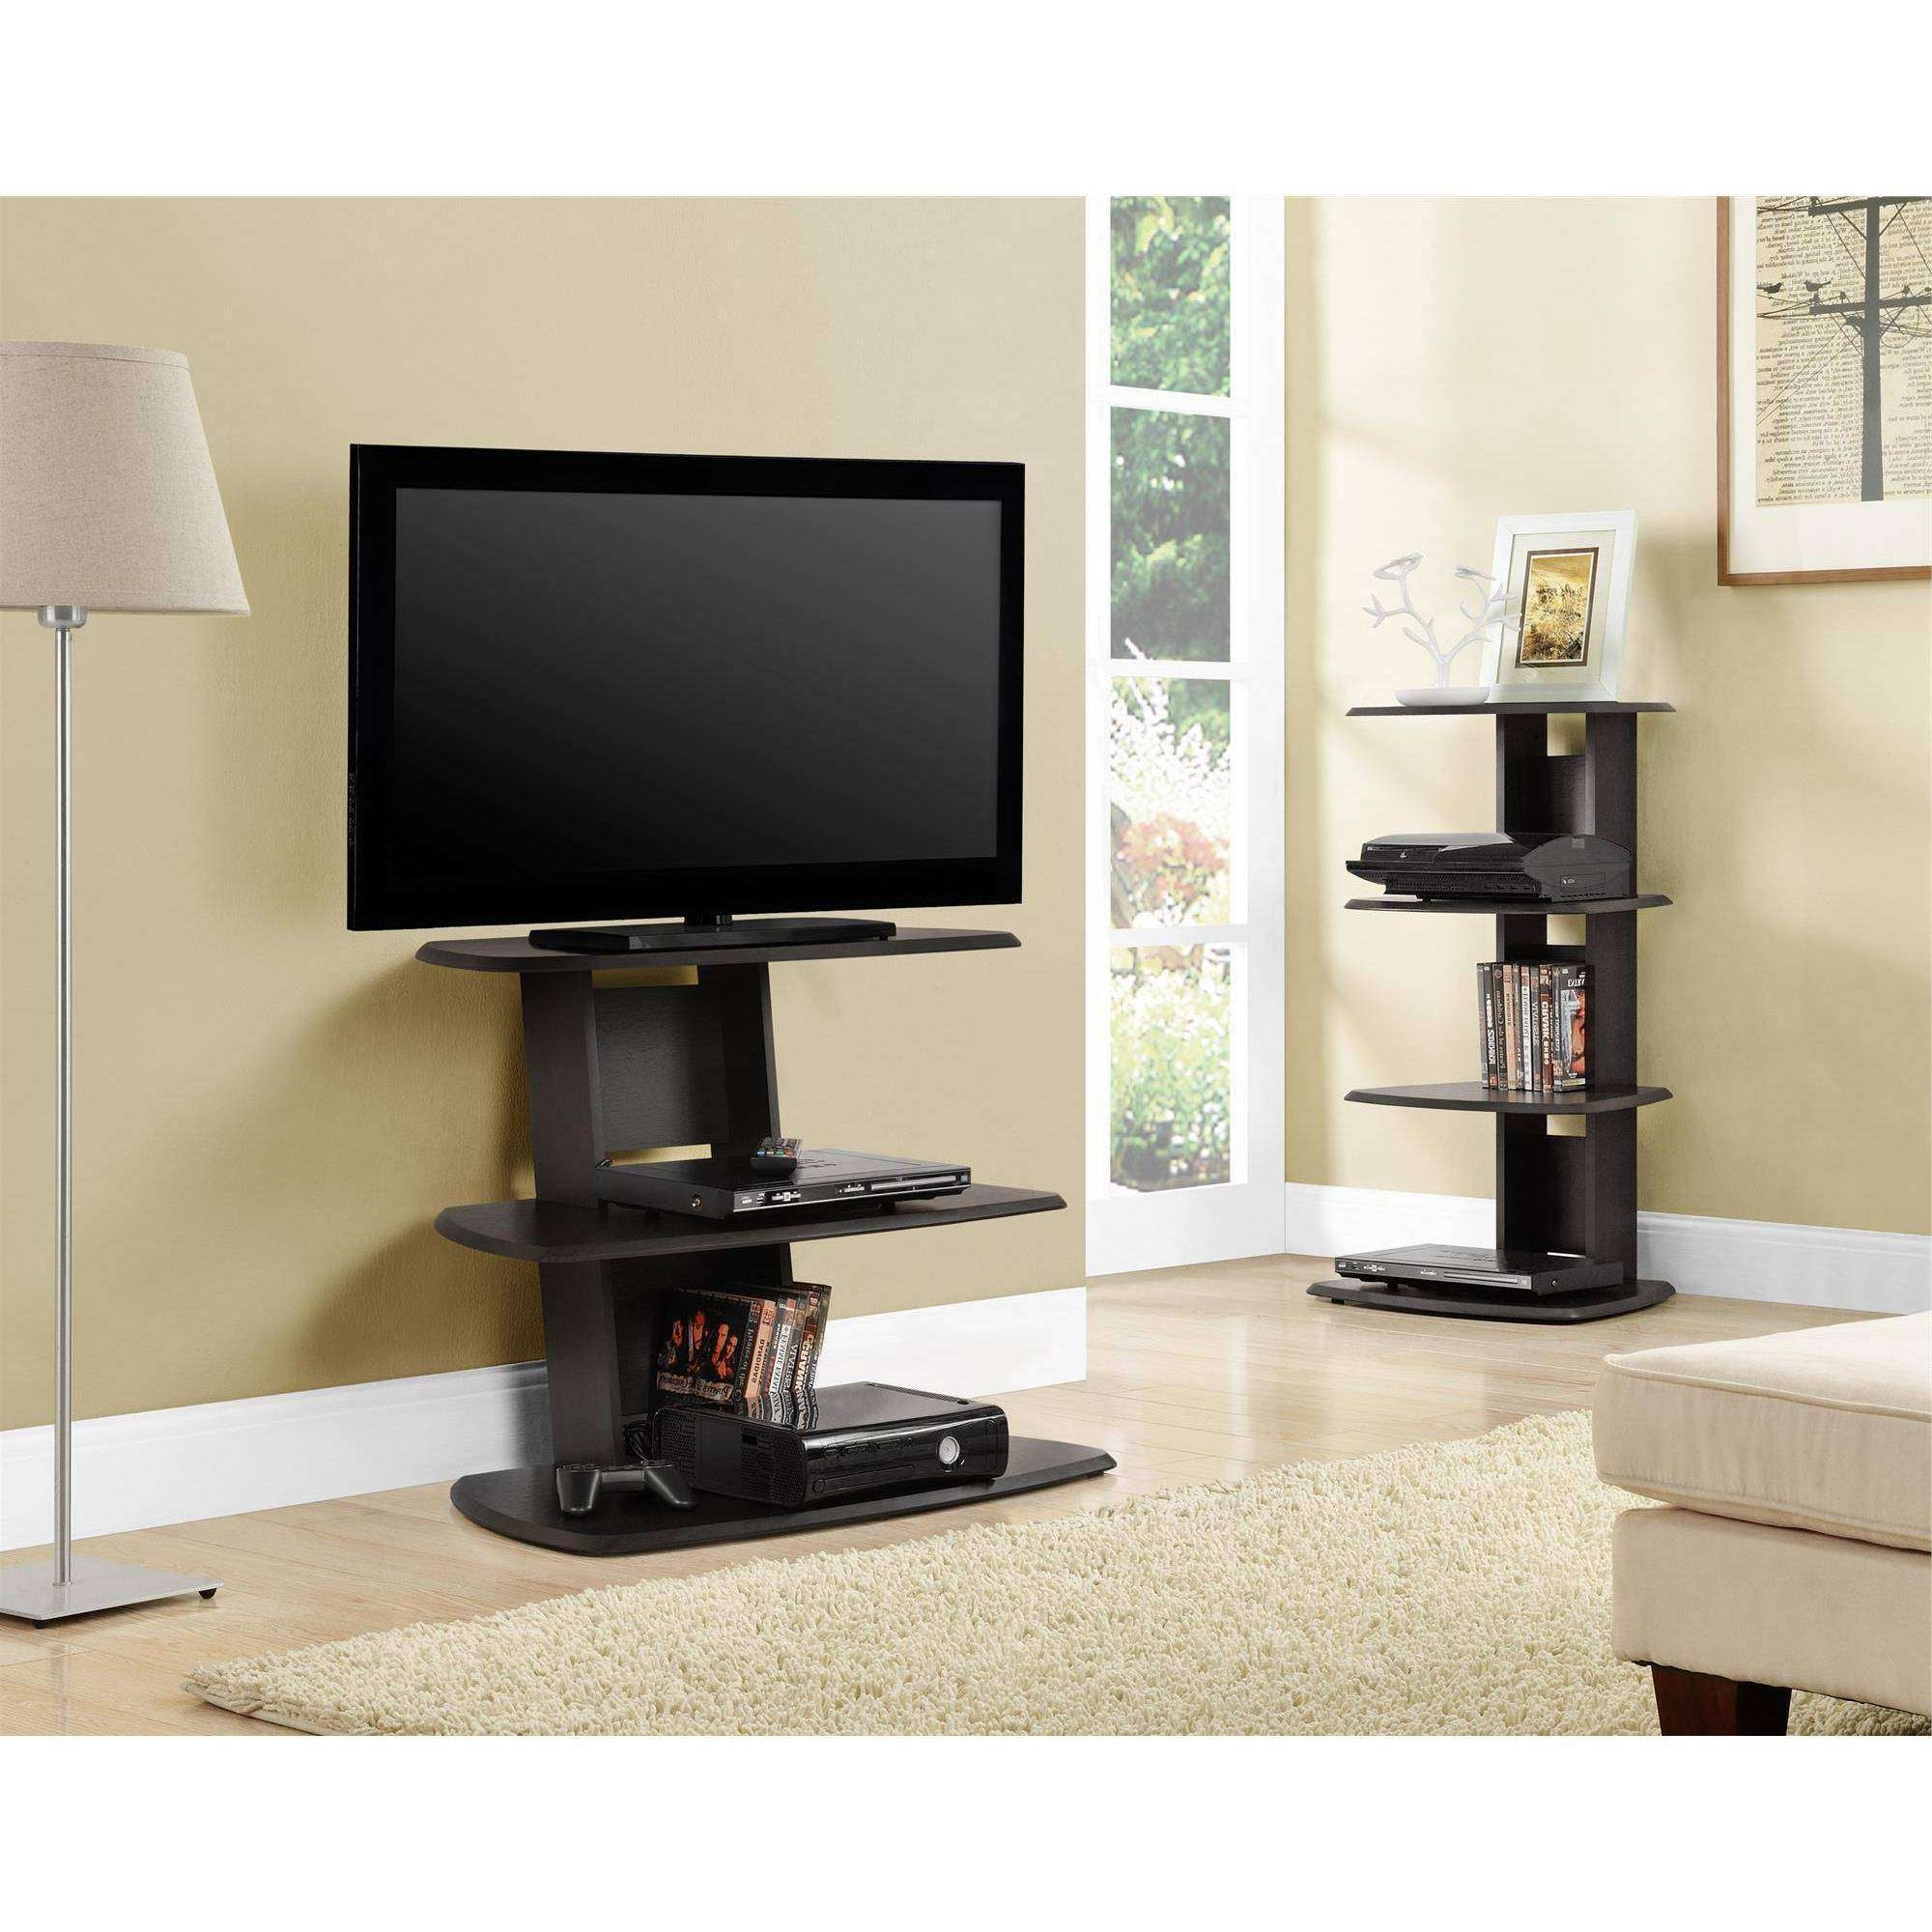 Ameriwood Home Galaxy Ii Tv Stand For Tvs Up To 32" Wide, Espresso Regarding 32 Inch Tv Stands (Gallery 1 of 15)